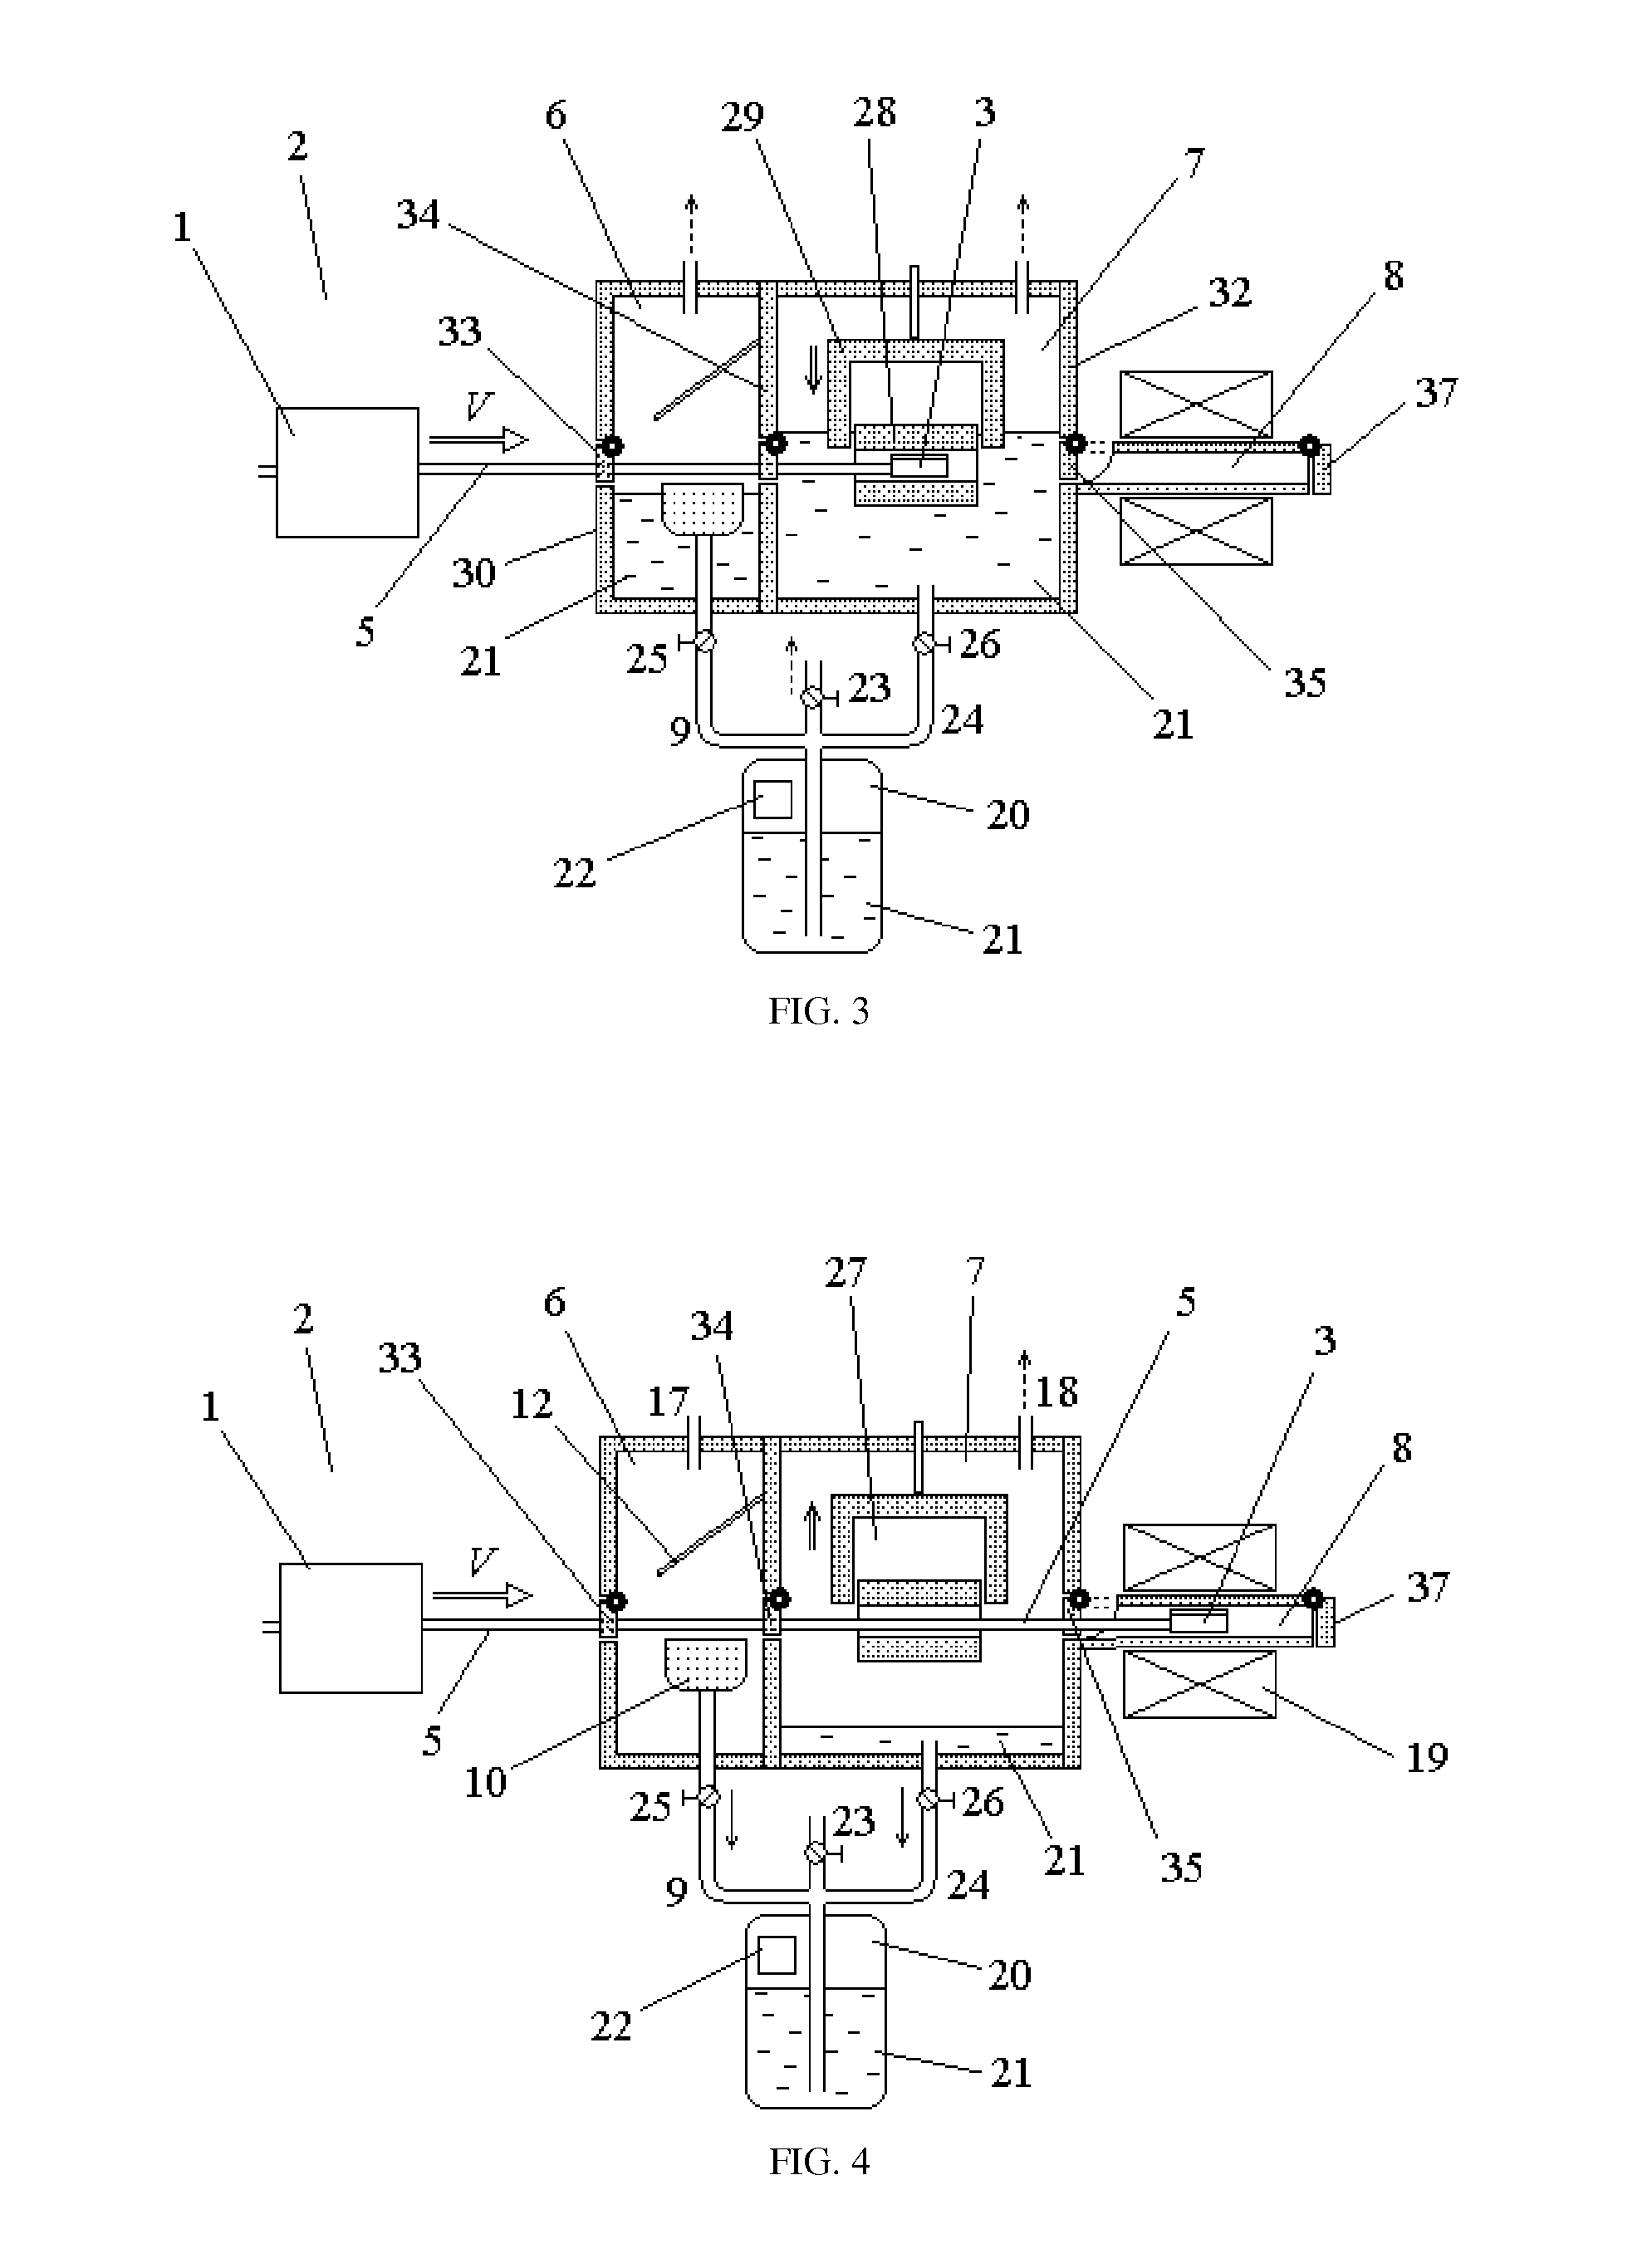 Method and Scalable Devices for Hyper-Fast Cooling and Warming